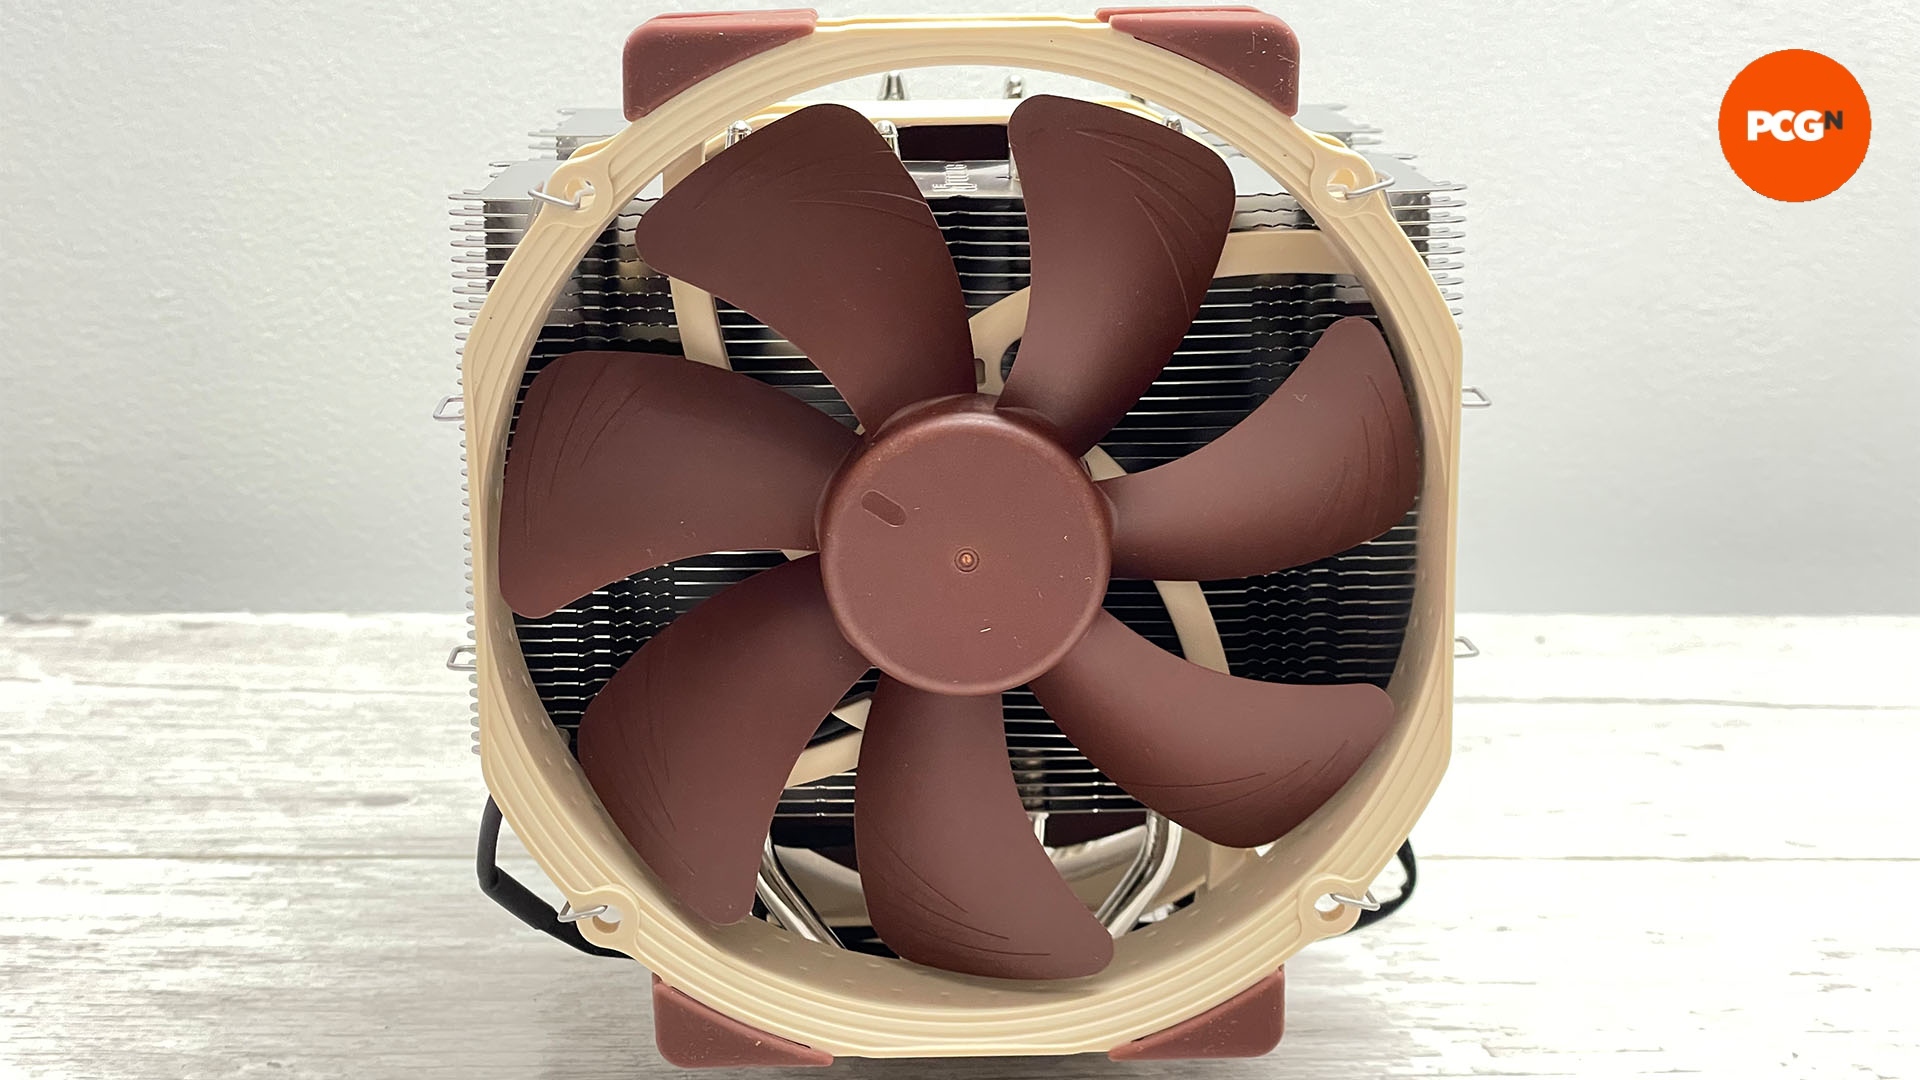 Noctua NH-D15 review image showing the product from the front. To the top right corner, you can see the PCGamesN logo.